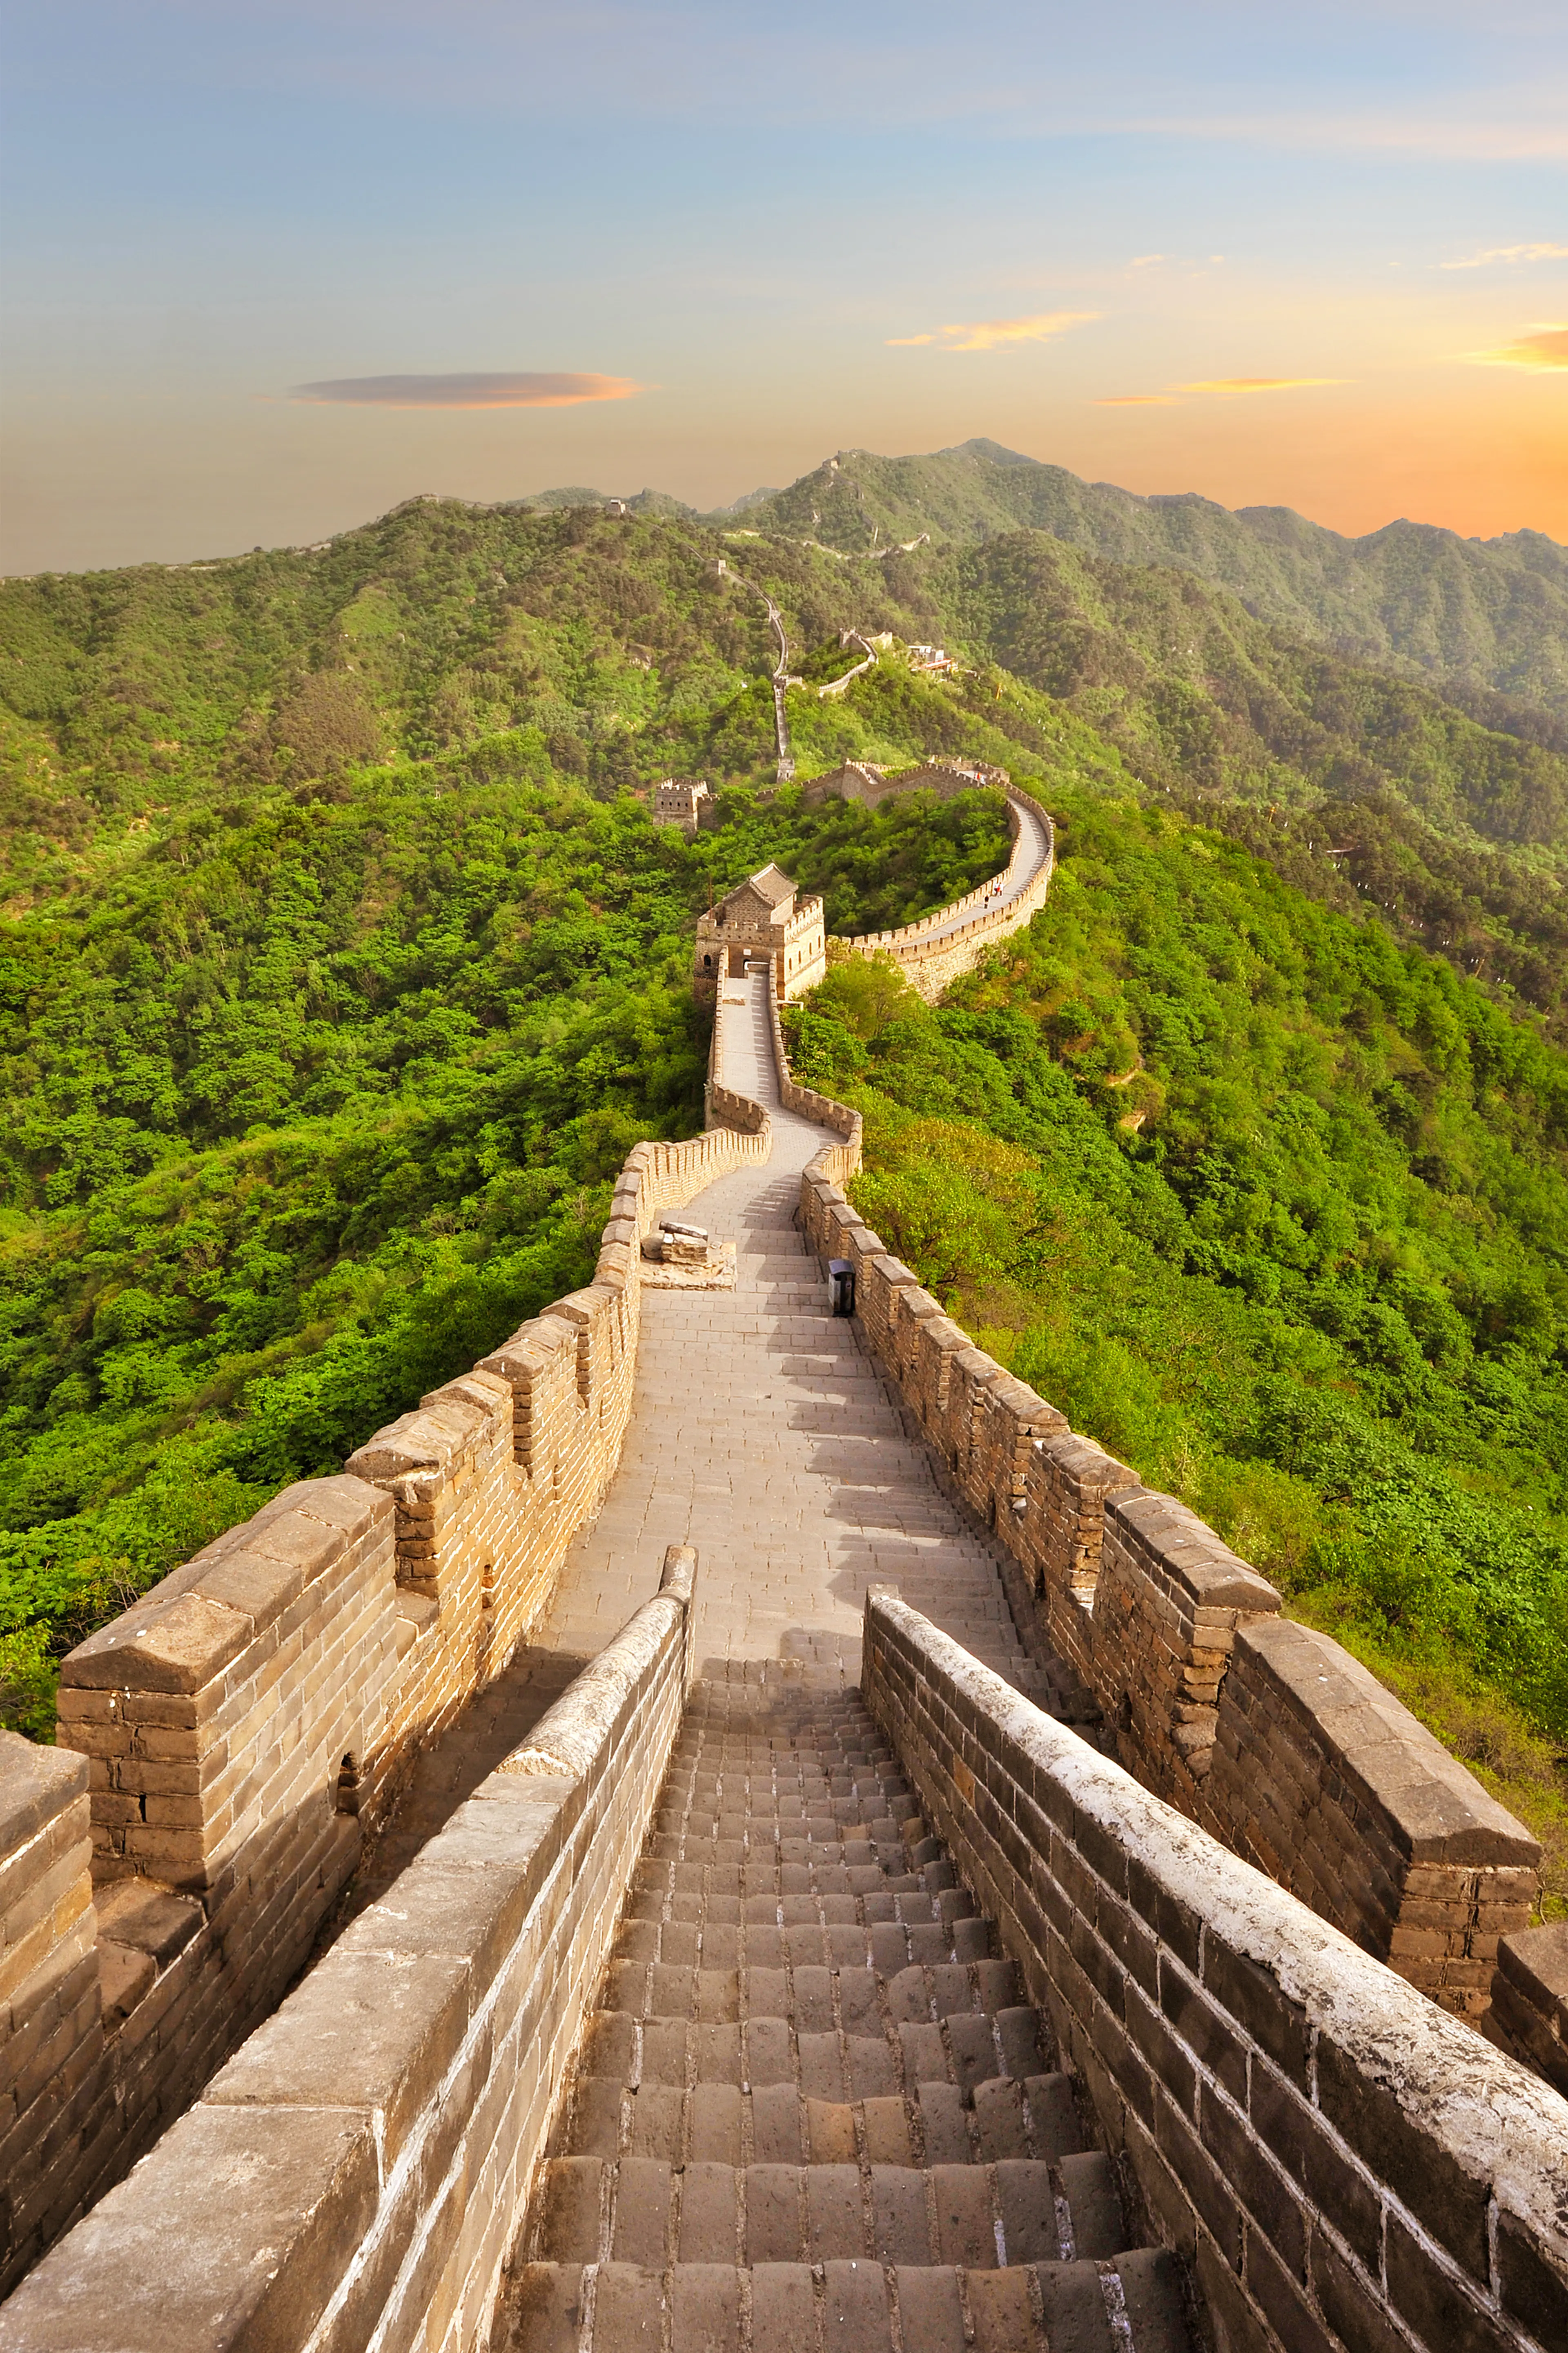 1-Day Family Sightseeing Tour at The Great Wall of China